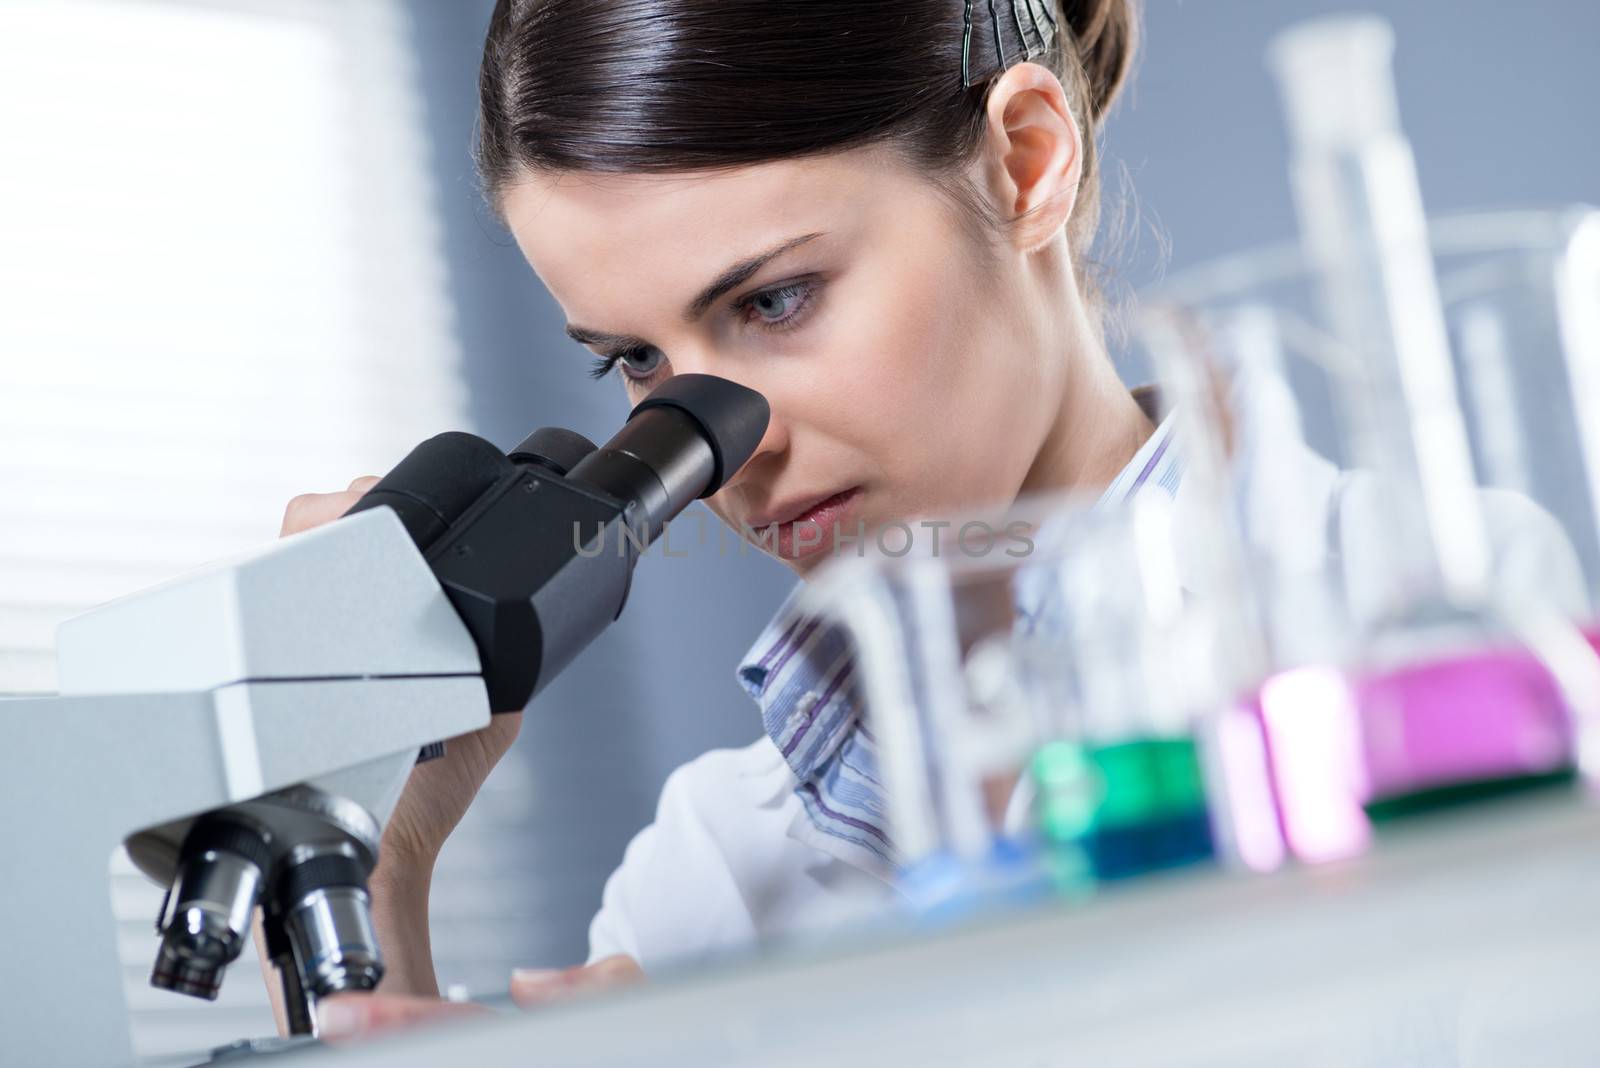 Young female researcher using microscope in the chemistry lab with laboratory glassware on foreground.